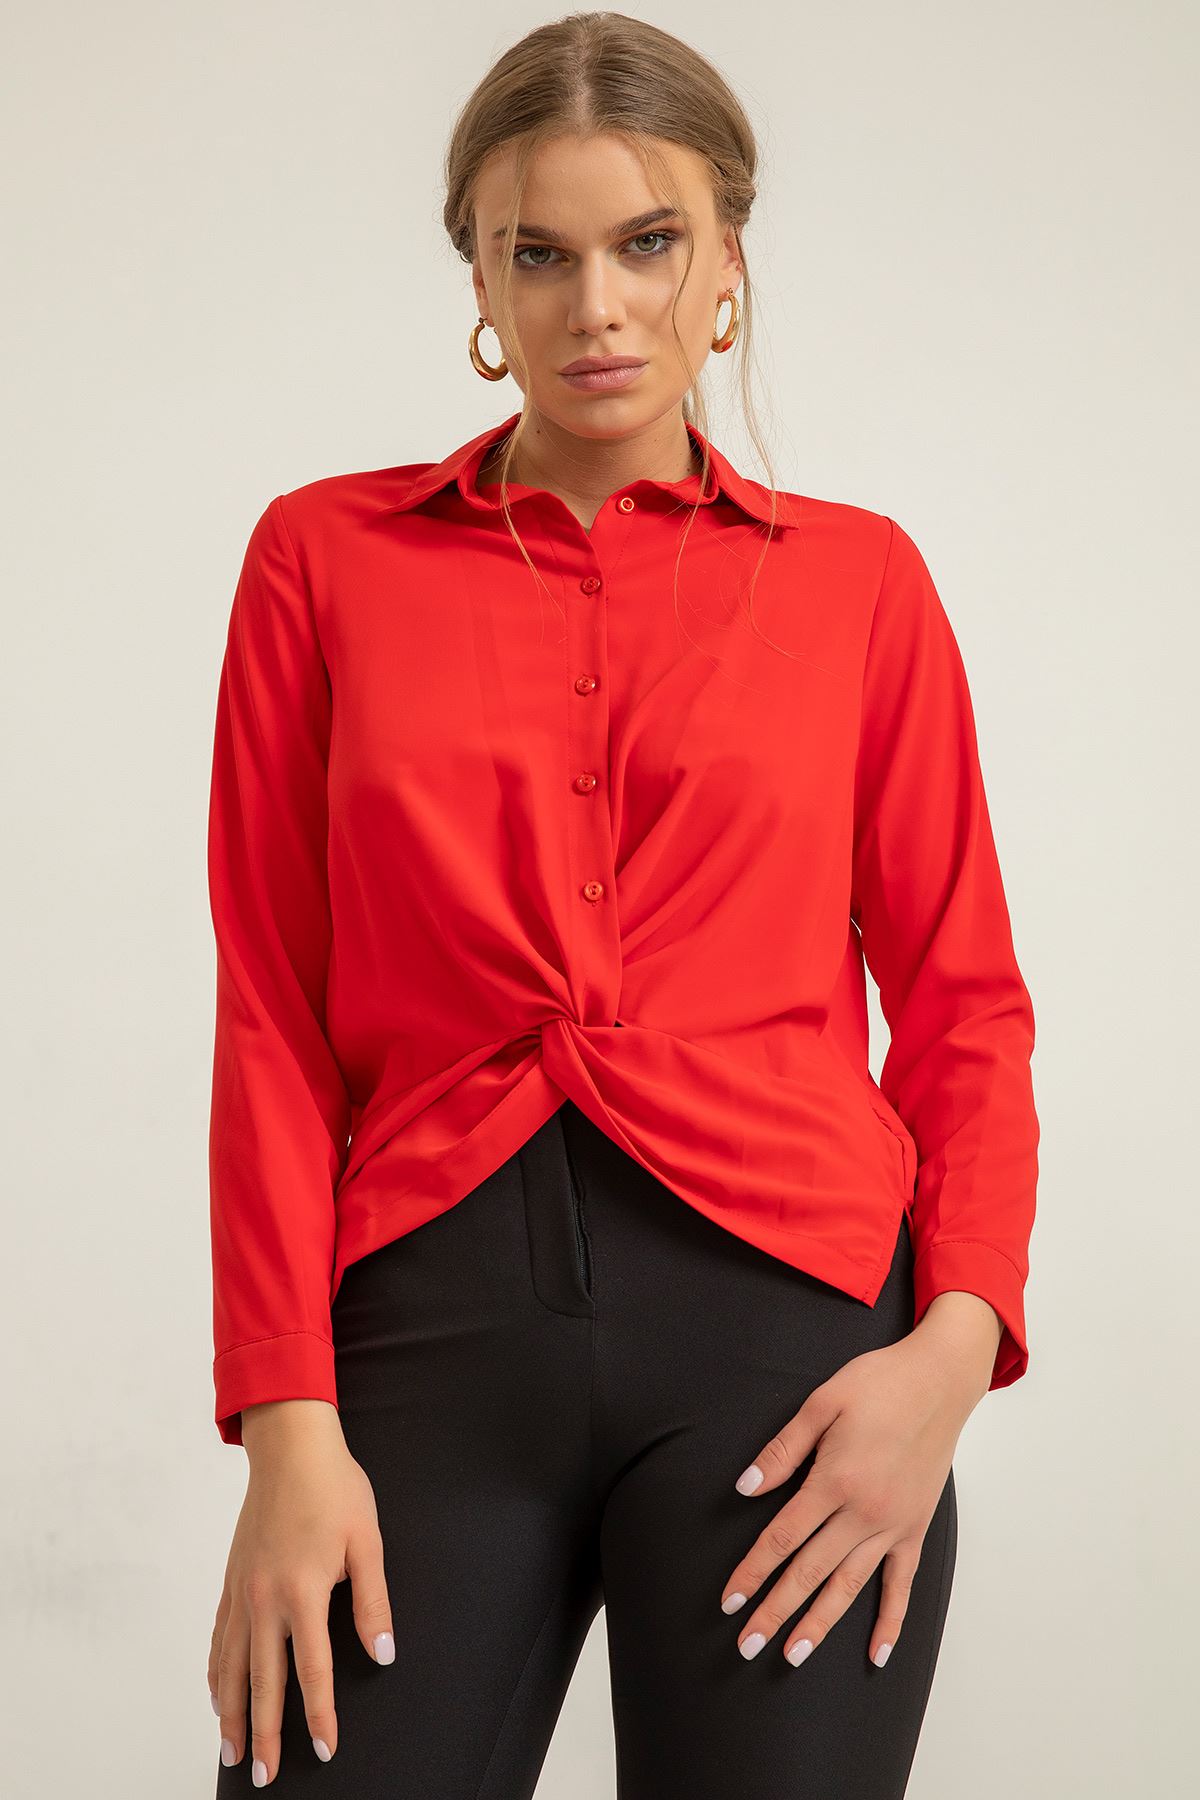 Jesica Fabric Long Sleeve Classical Button Front Women'S Shirt - Red